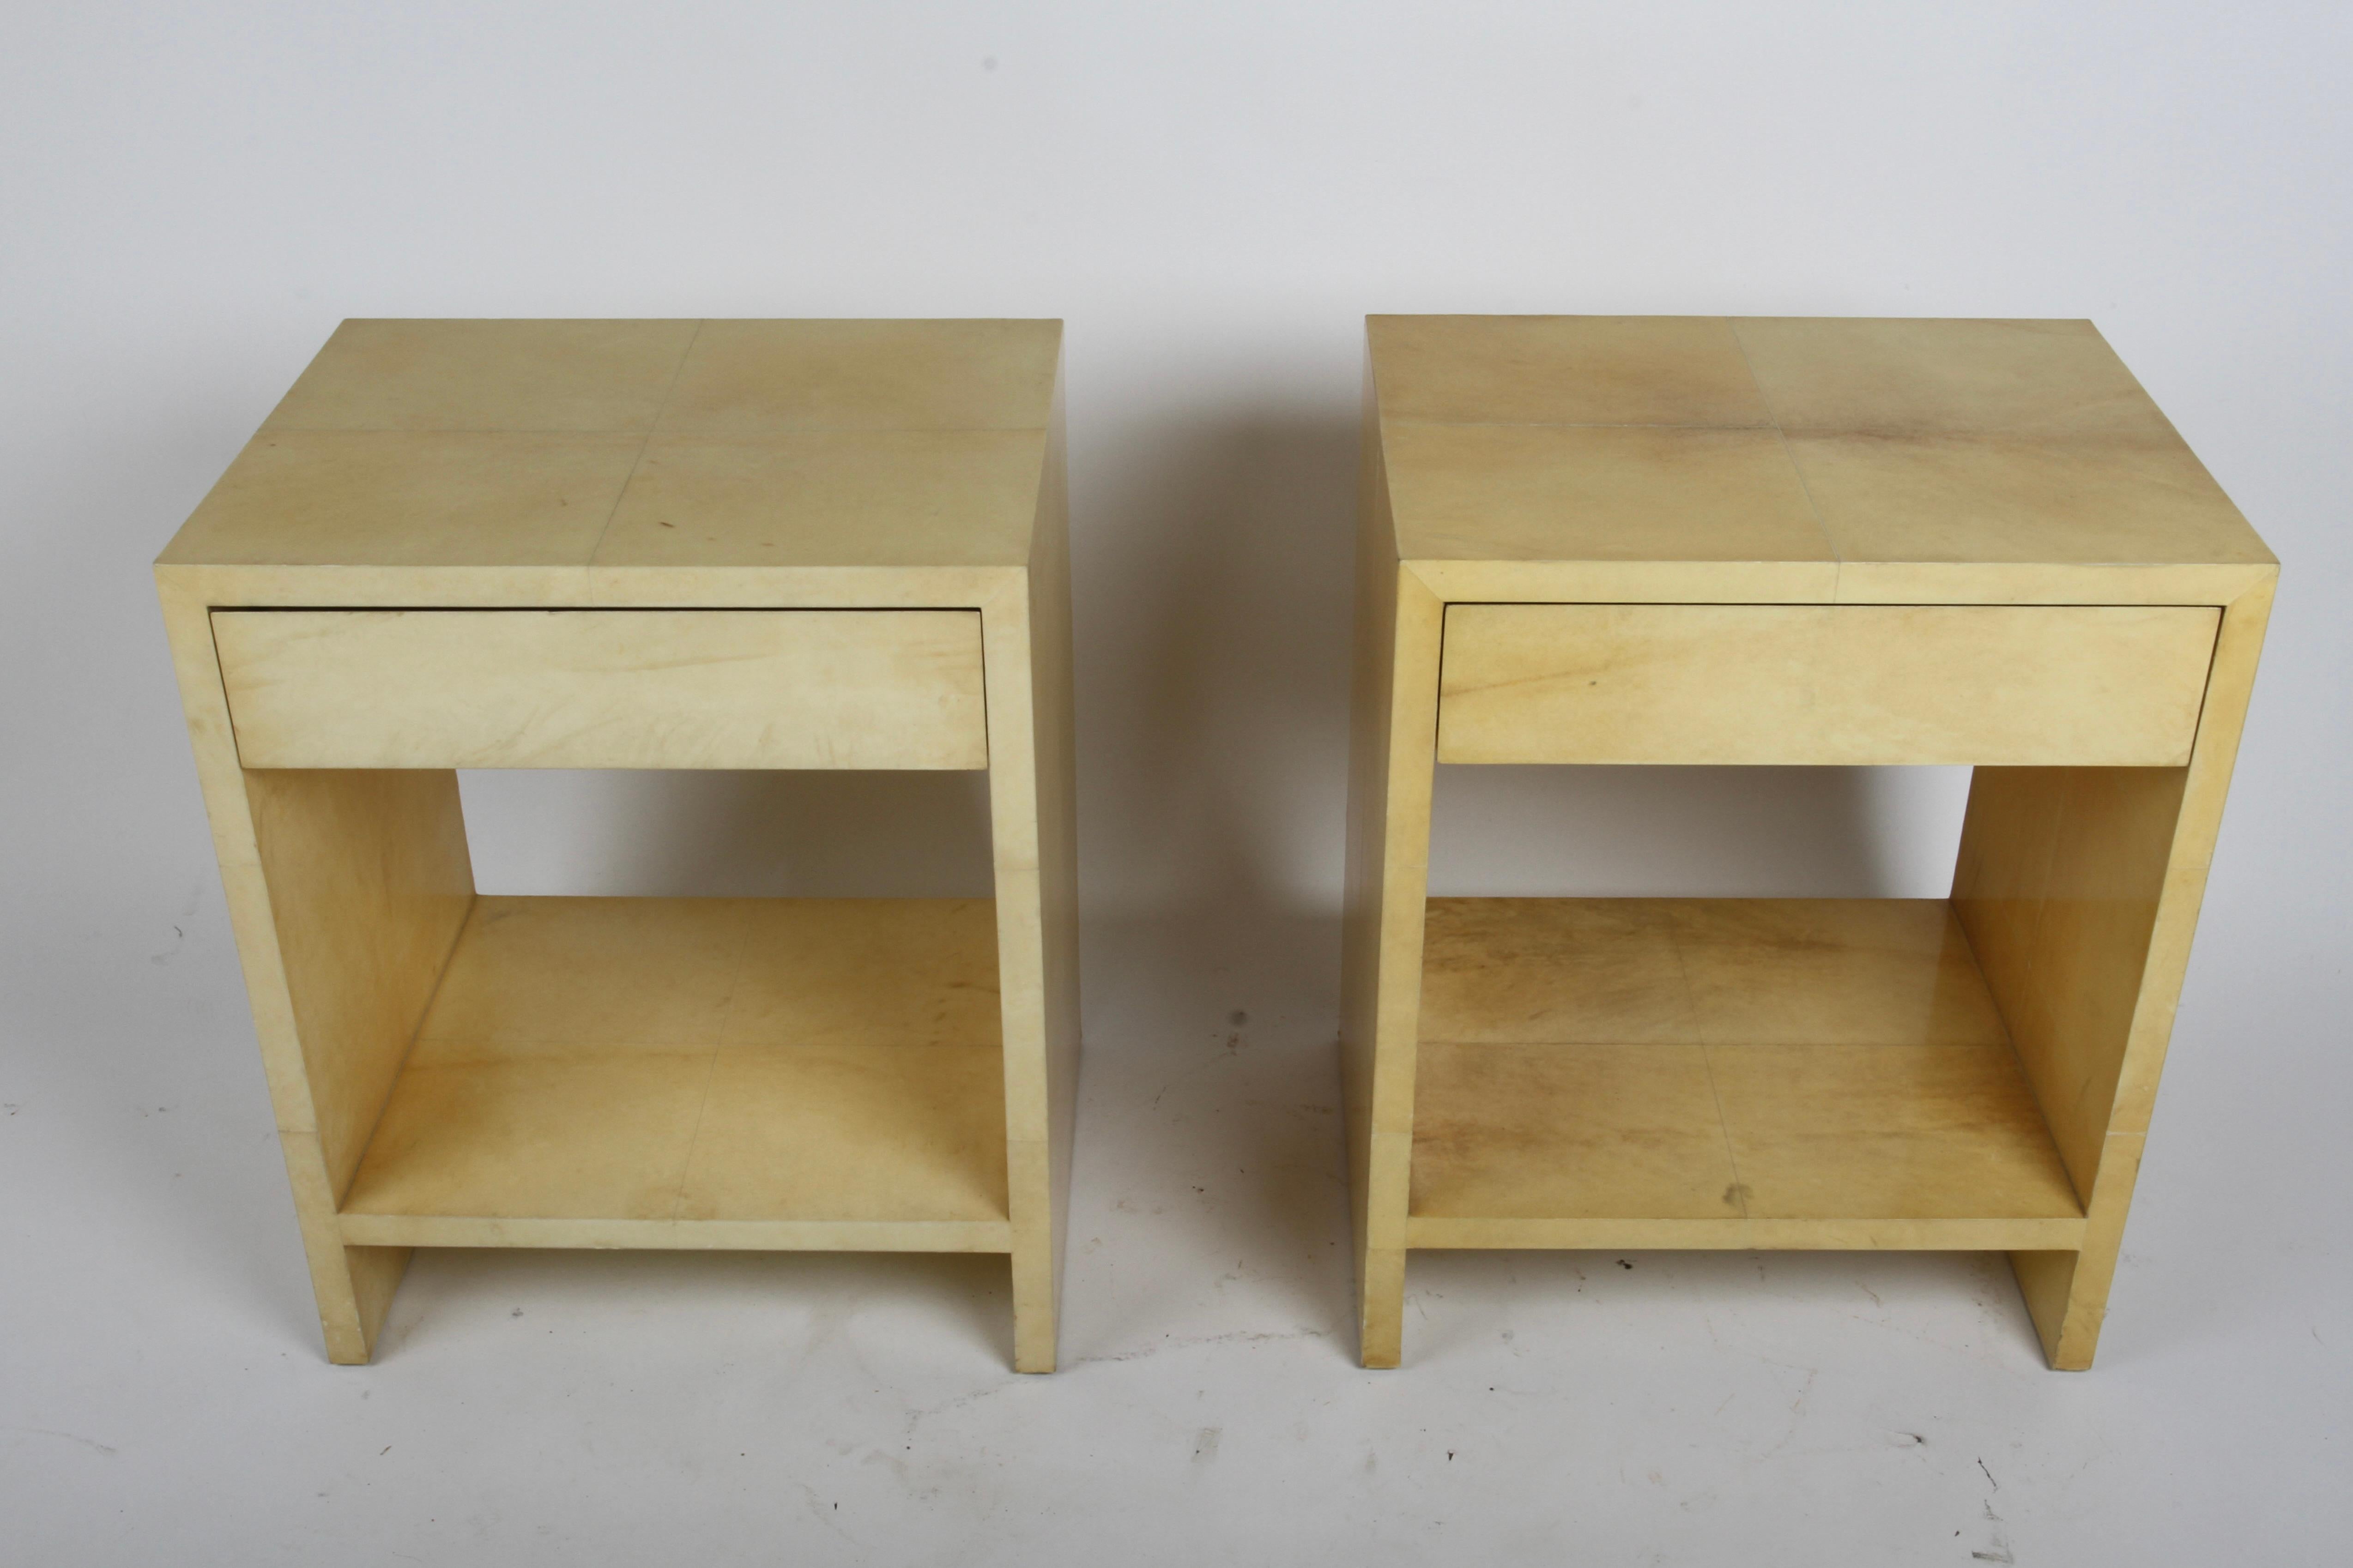 Excellent scale and form, well built pair of nightstands or end tables by Henredon with drawer. These are covered in warm colored goat skin parchment in the Art Deco style of Jean-Michel Frank, or the 1950s style of architect Samuel Marx, Aldo Tura